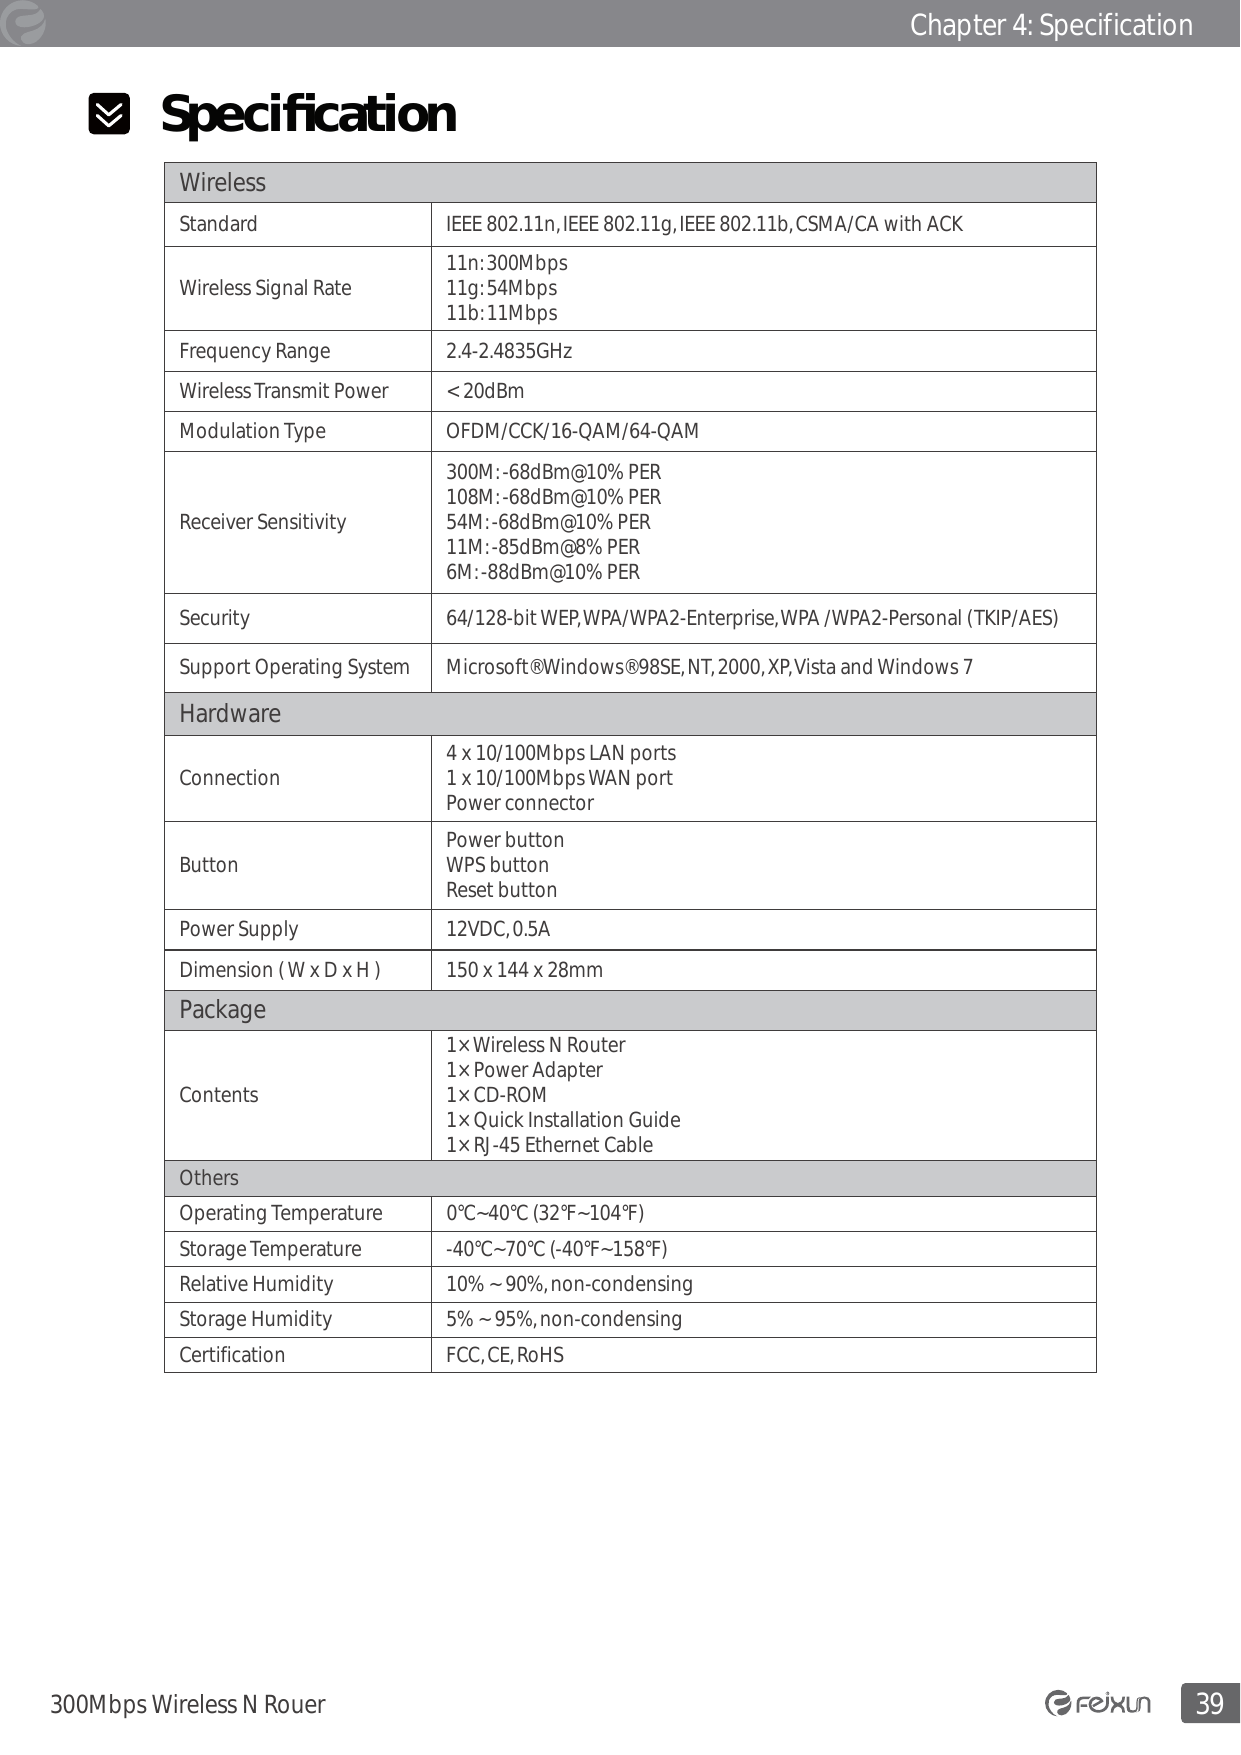 Chapter 4: Specification39300Mbps Wireless N Rouer  Speciﬁ cationWireless Standard IEEE 802.11n, IEEE 802.11g, IEEE 802.11b, CSMA/CA with ACKWireless Signal Rate 11n: 300Mbps11g: 54Mbps11b: 11MbpsFrequency Range  2.4-2.4835GHz Wireless Transmit Power &lt; 20dBmModulation Type  OFDM/CCK/16-QAM/64-QAMReceiver Sensitivity 300M: -68dBm@10% PER108M: -68dBm@10% PER54M: -68dBm@10% PER11M: -85dBm@8% PER6M: -88dBm@10% PERSecurity 64/128-bit WEP, WPA/WPA2-Enterprise, WPA /WPA2-Personal (TKIP/AES)Support Operating System Microsoft® Windows® 98SE, NT, 2000, XP, Vista and Windows 7Hardware Connection 4 x 10/100Mbps LAN ports1 x 10/100Mbps WAN portPower connectorButton Power buttonWPS buttonReset buttonPower Supply 12VDC, 0.5ADimension ( W x D x H ) 150 x 144 x 28mmPackage Contents1× Wireless N Router1× Power Adapter1× CD-ROM1× Quick Installation Guide1× RJ-45 Ethernet CableOthersOperating Temperature 0°C~40°C (32°F~104°F)Storage Temperature -40°C~70°C (-40°F~158°F)Relative Humidity 10% ~ 90%, non-condensingStorage Humidity 5% ~ 95%, non-condensingCertification FCC, CE, RoHS